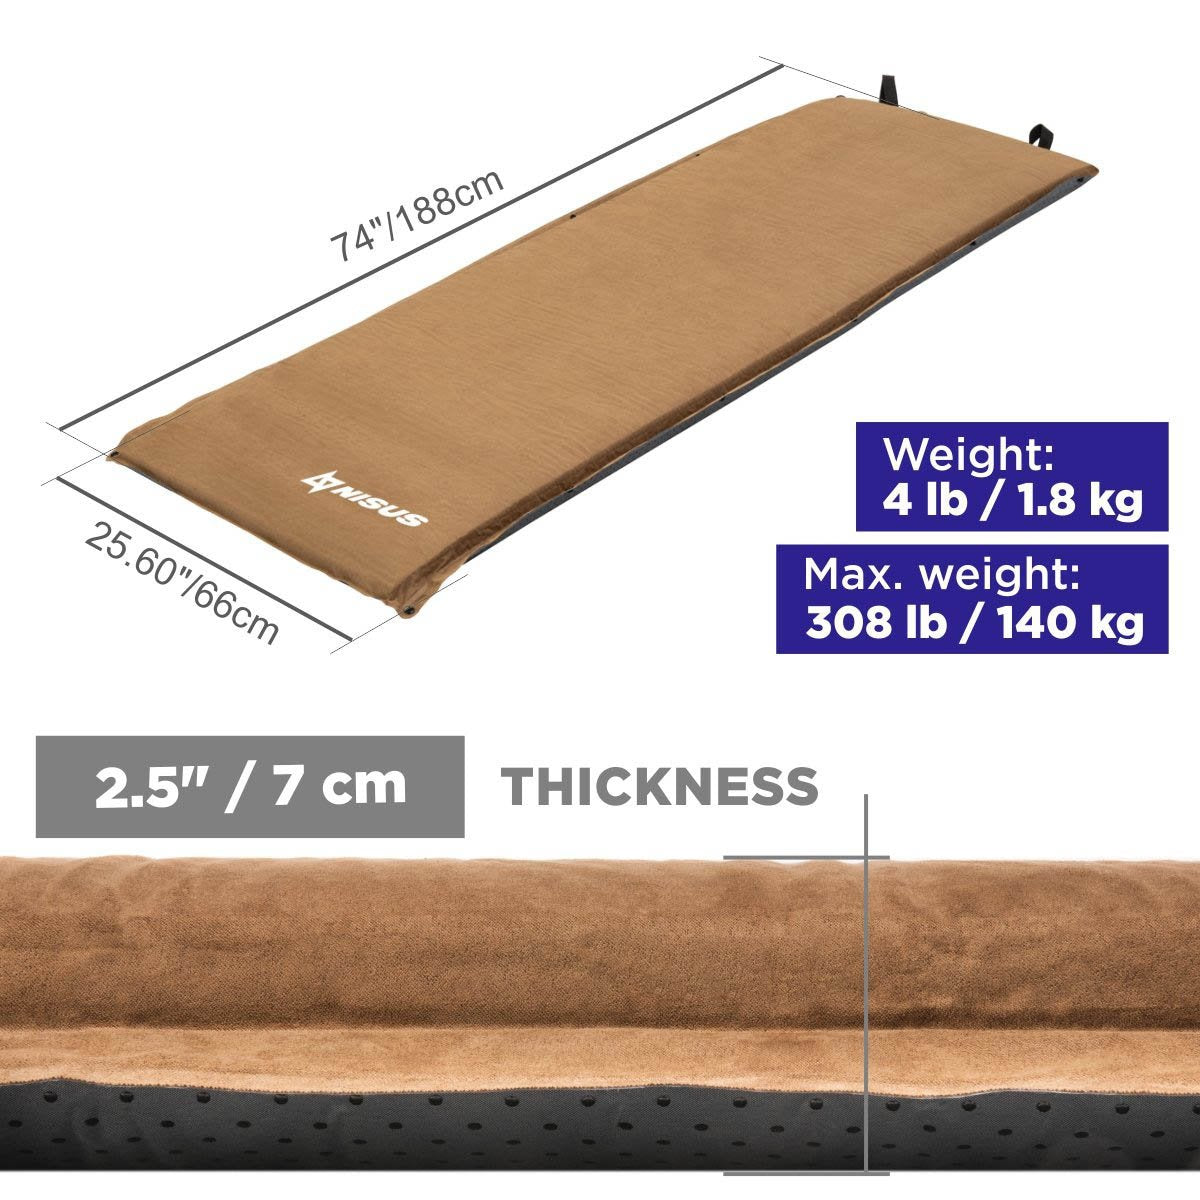 74" long, 25.6" wide, 2.5" thick Beige Self Inflating Sleeping Pad carries up to 308 lbs and  weighs only 4 lb